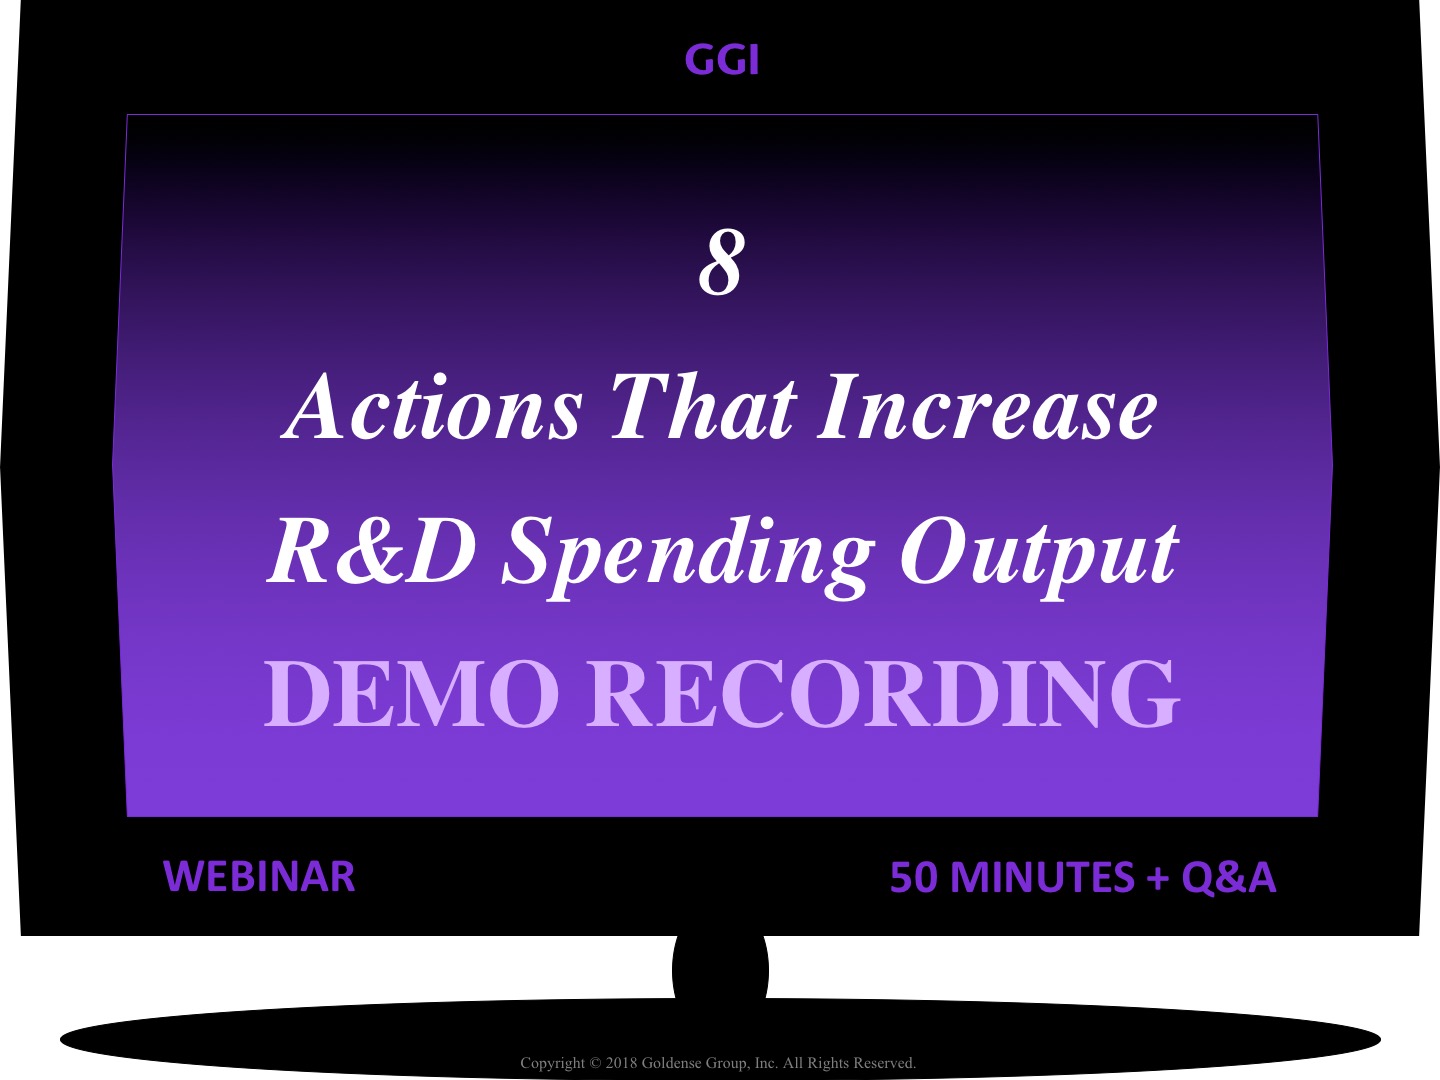 8 Actions That Increase R&D Spending Output Webinar